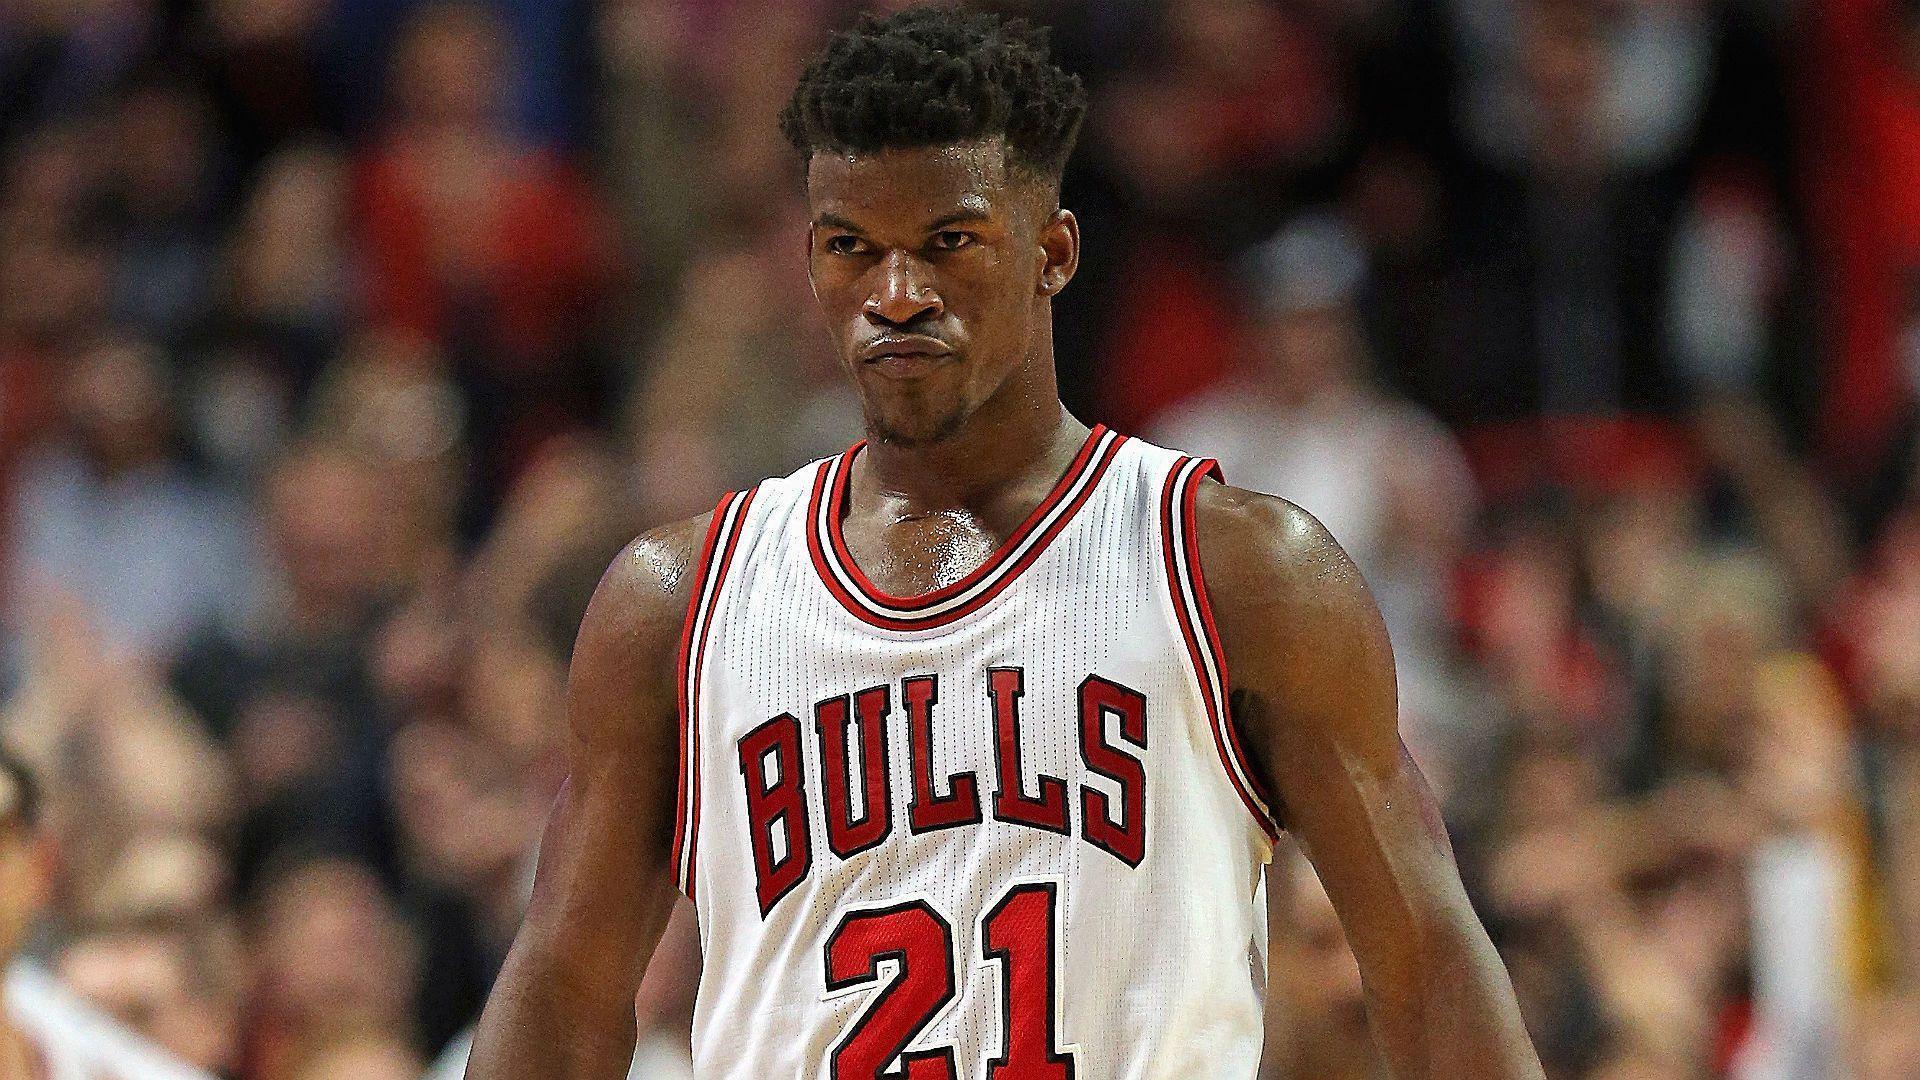 Jimmy Butler can&;t afford to take Bulls&; qualifying offer. NBA